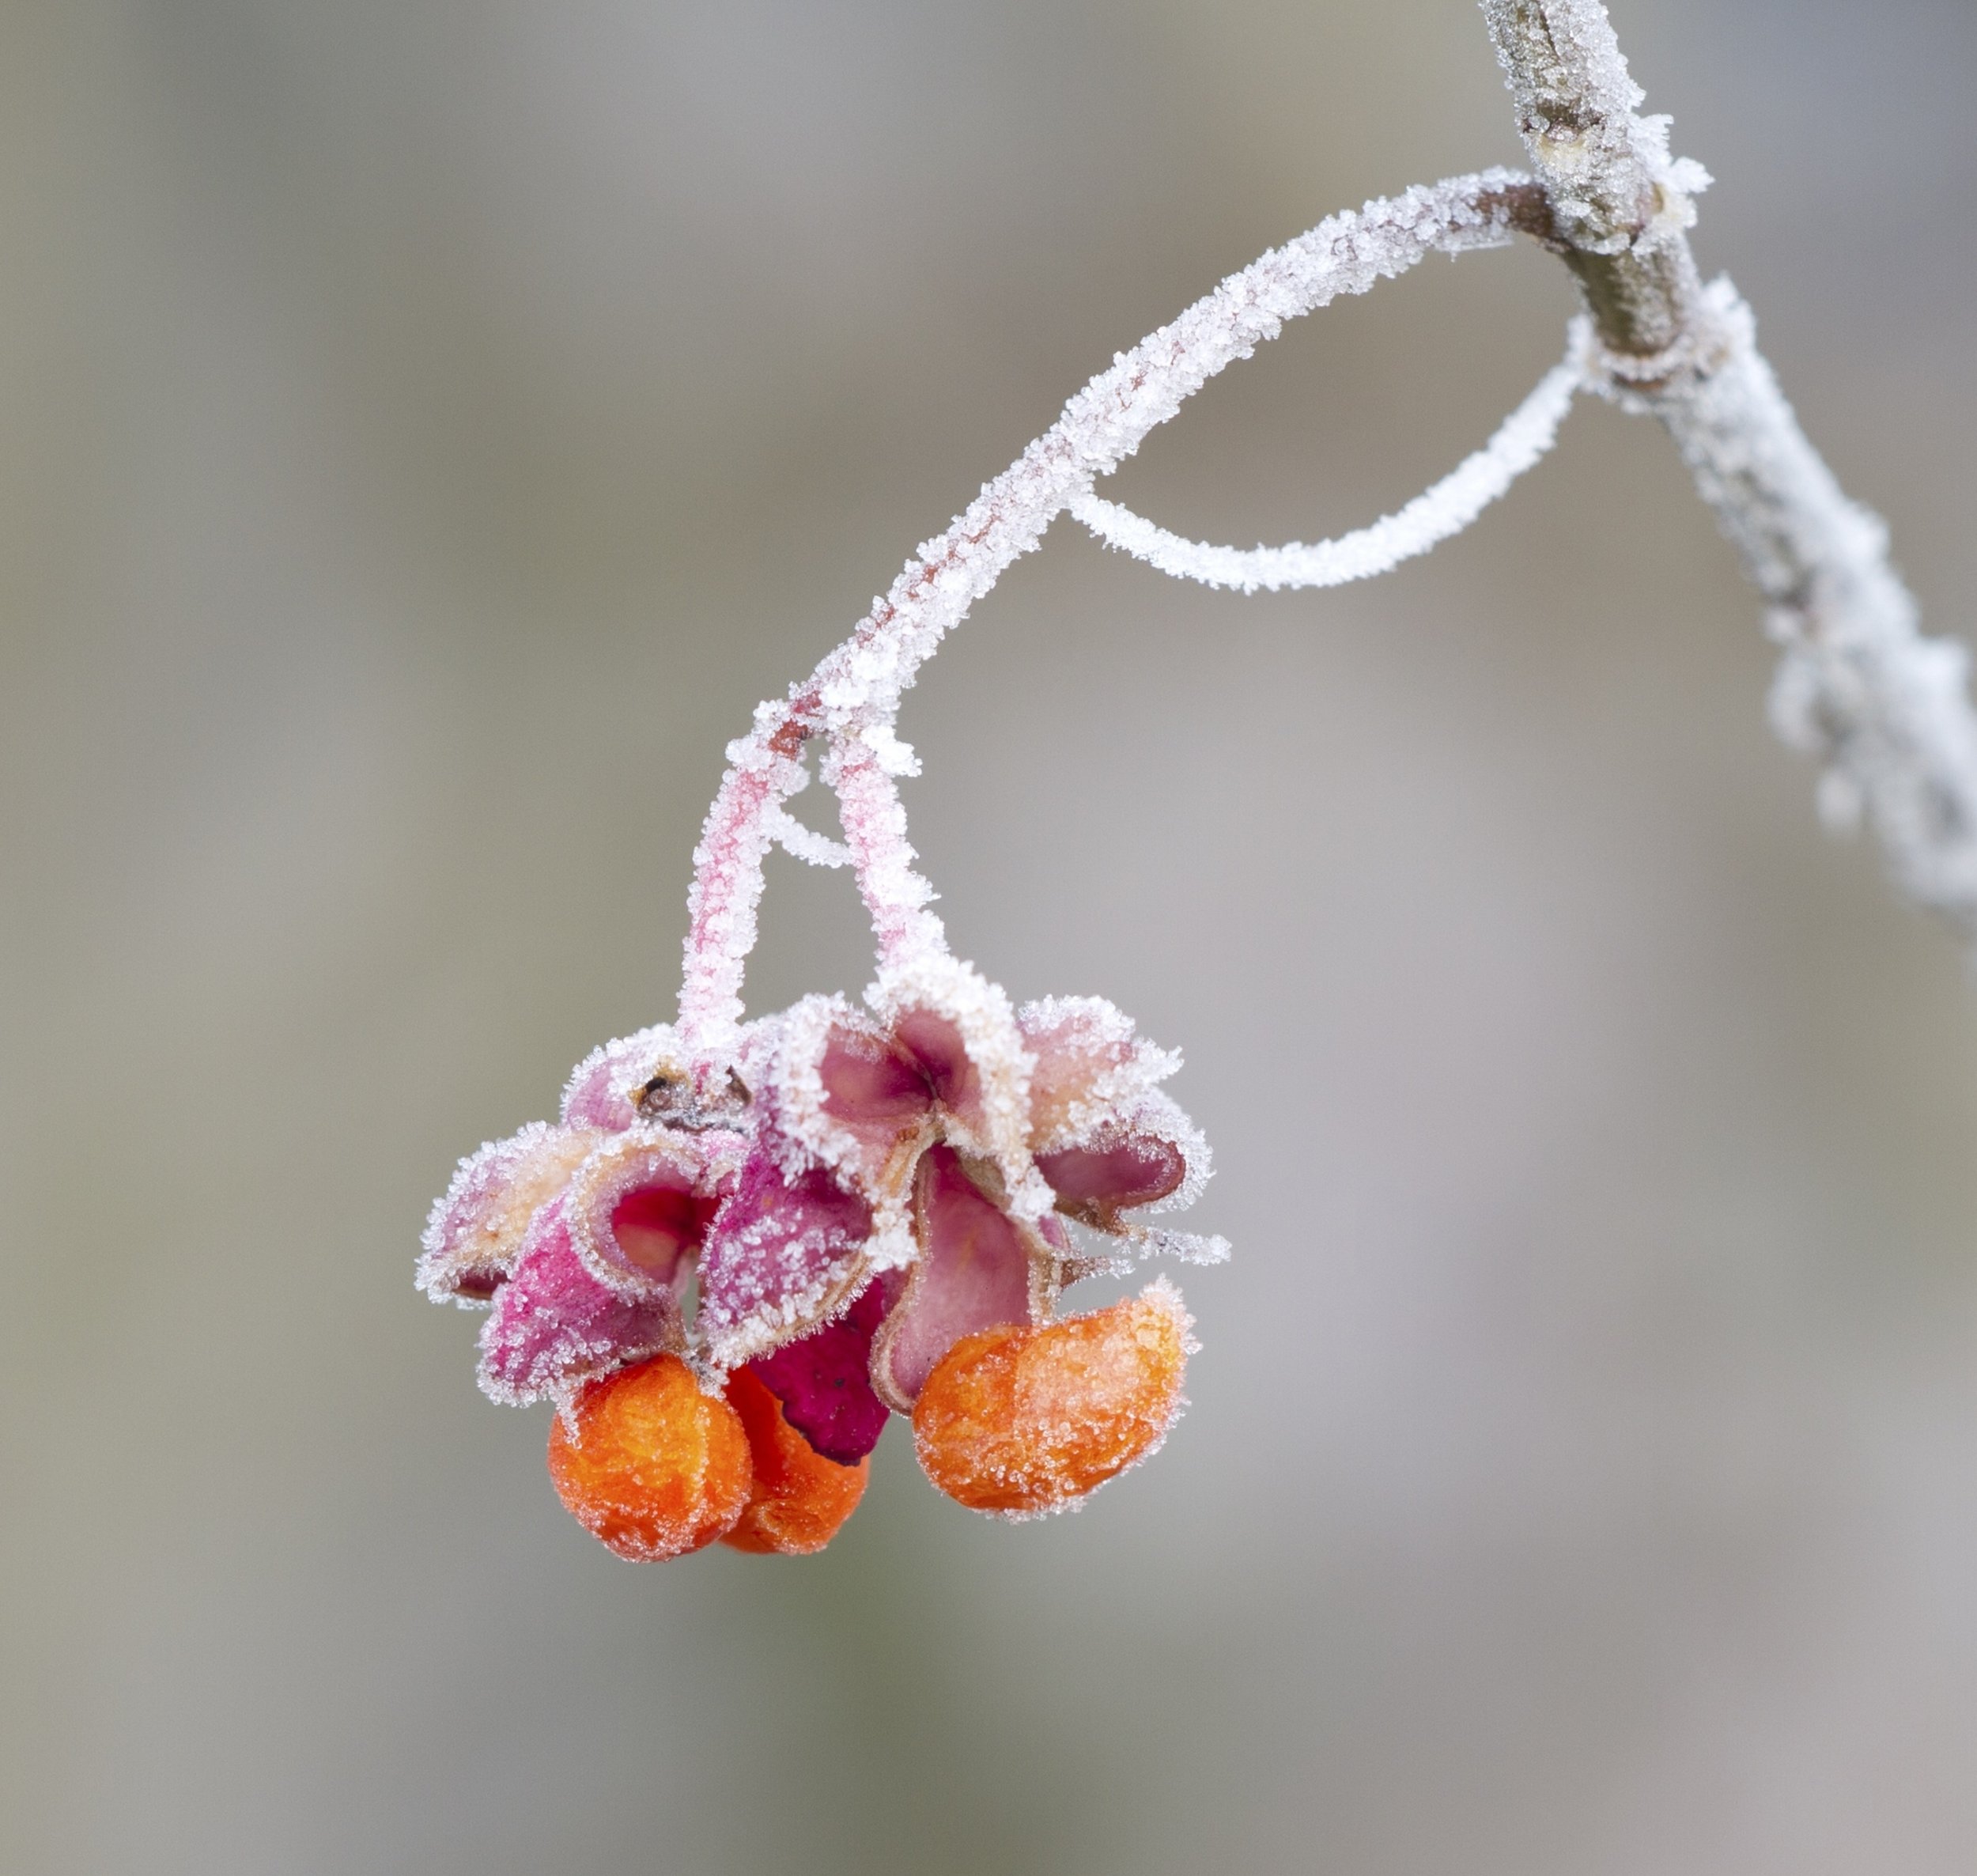 How Does Frost Form? — Garden sPOTS